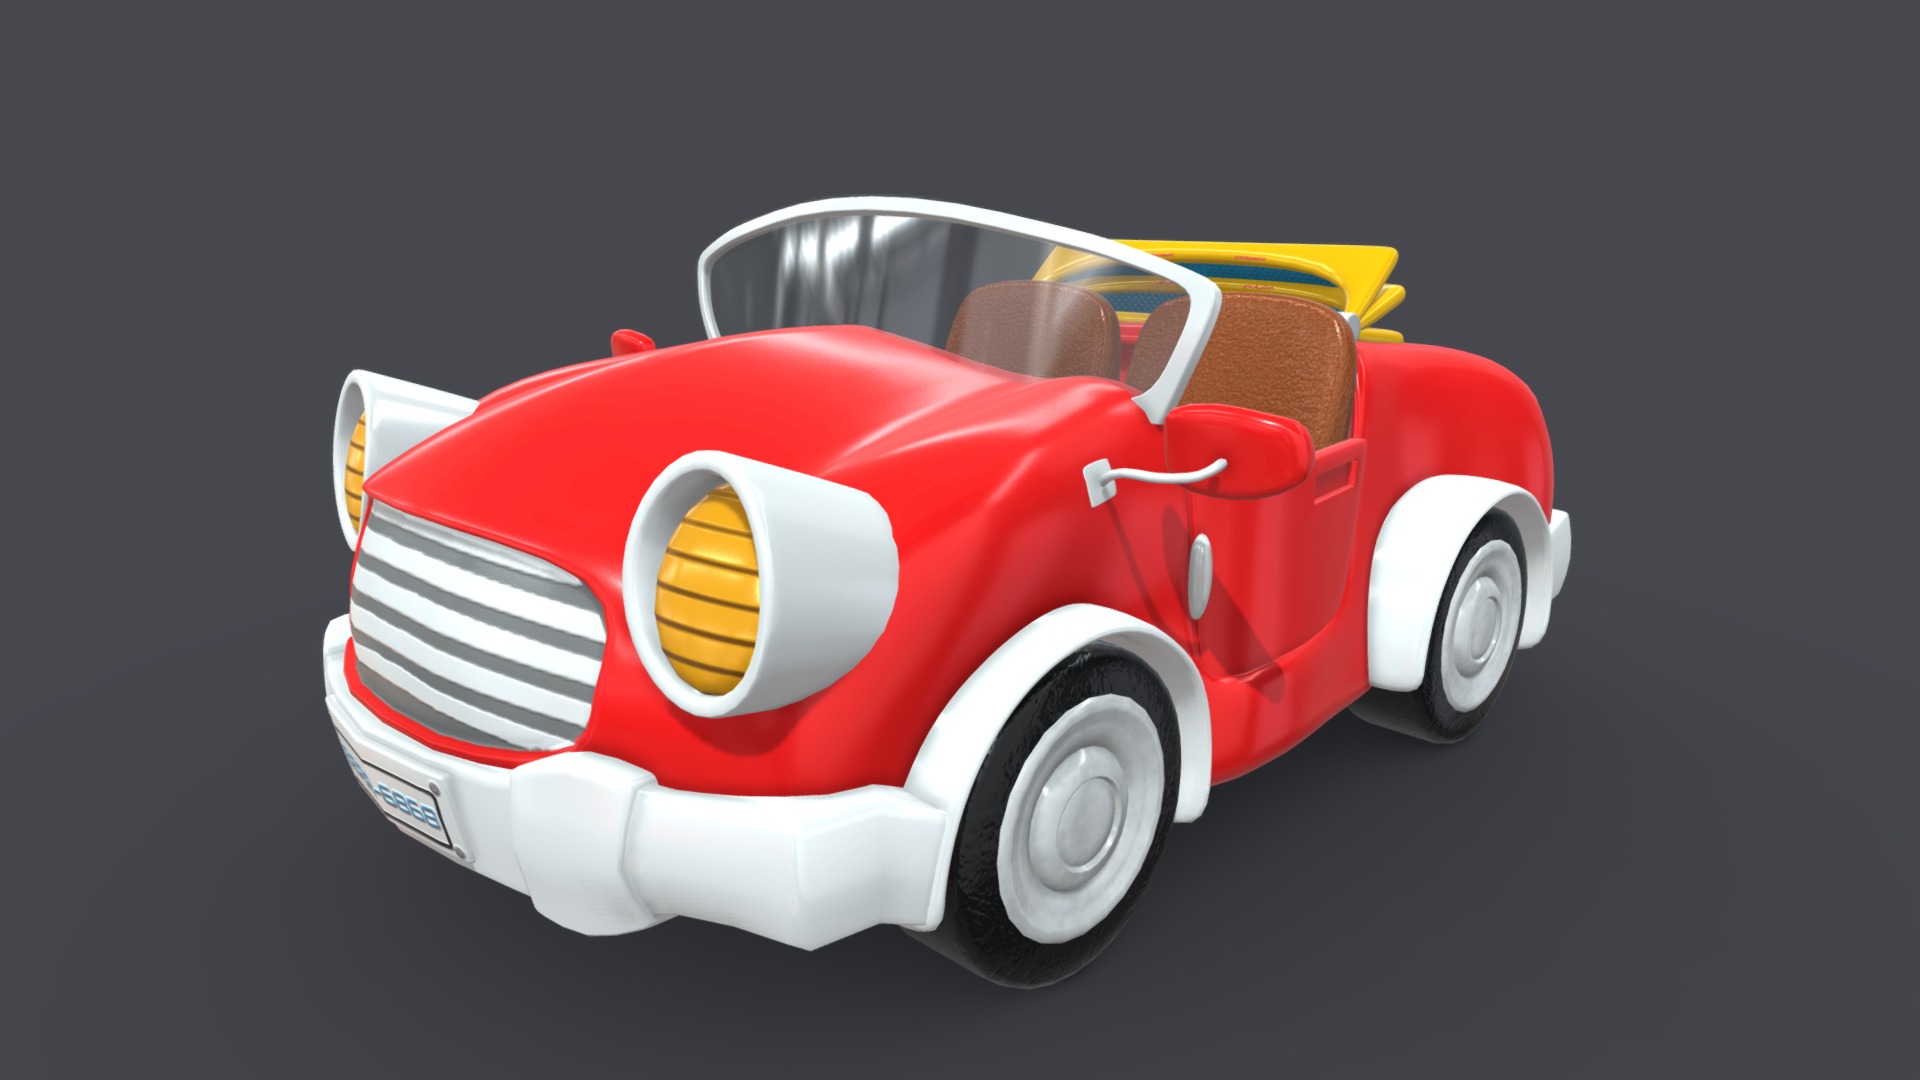 3D model Asset – Cartoons – Car – 01 – 3D Model - This is a 3D model of the Asset - Cartoons - Car - 01 - 3D Model. The 3D model is about a red and white toy car.